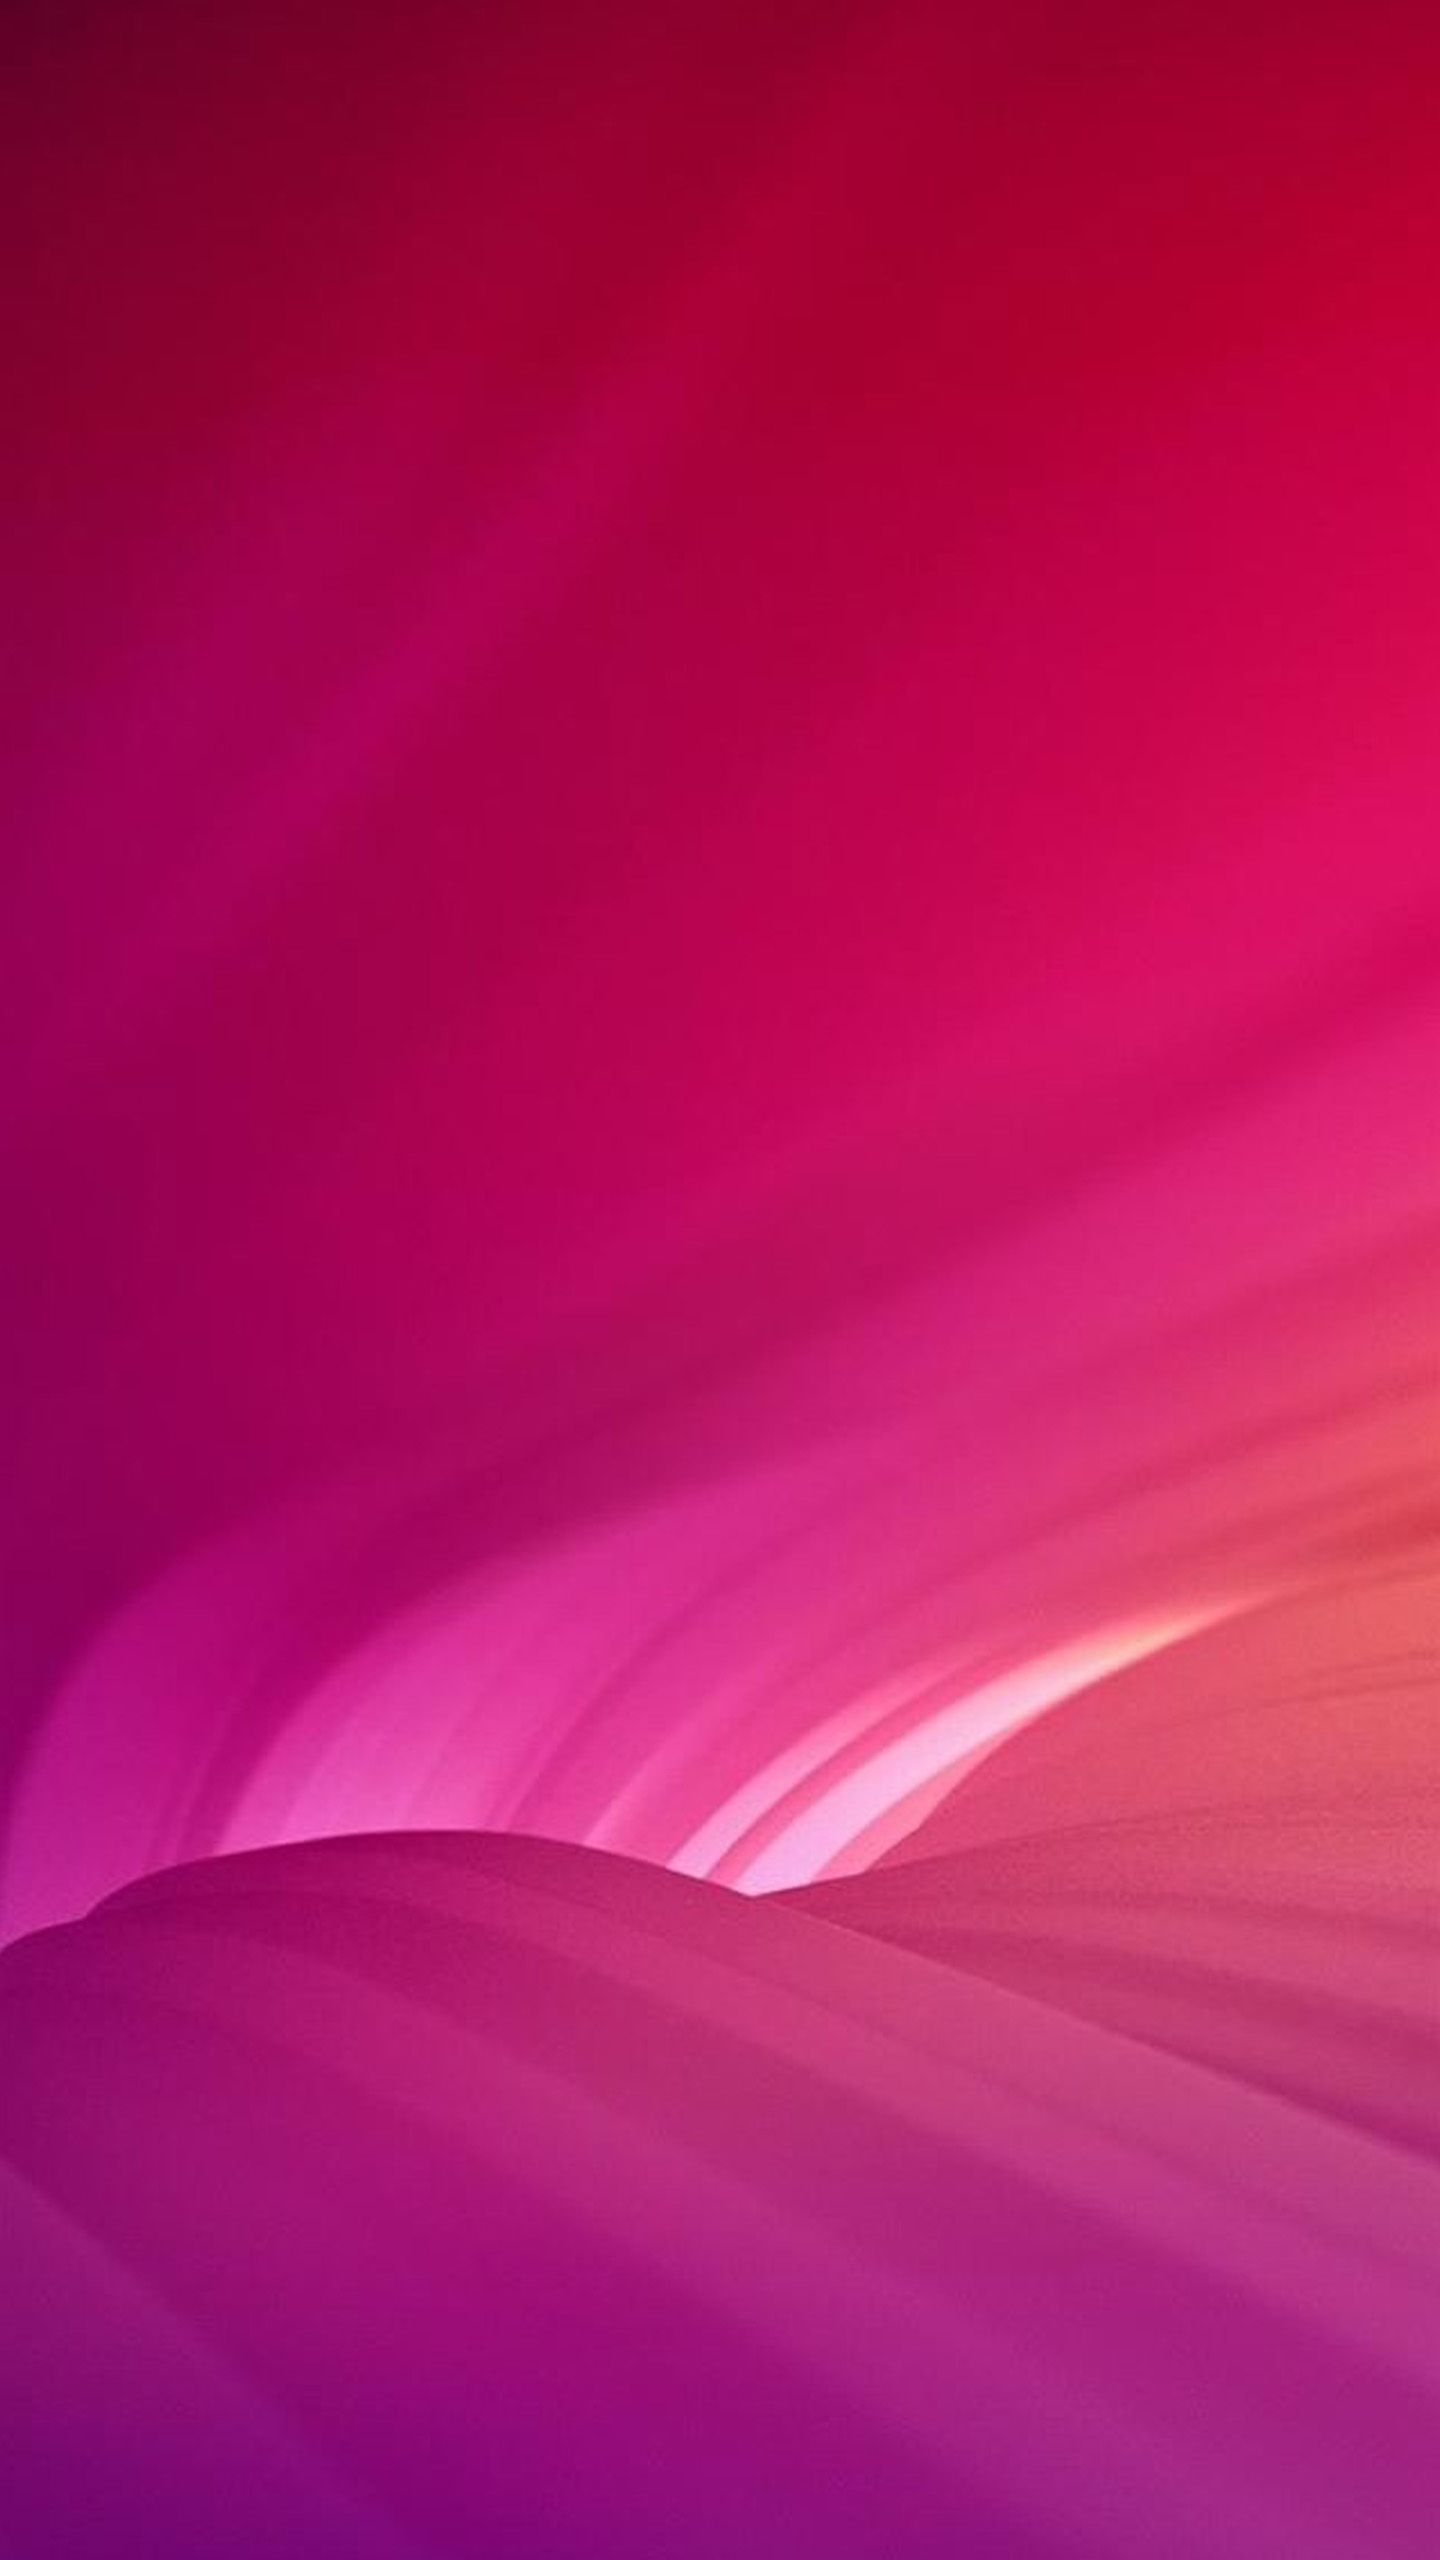 Abstract Samsung Galaxy Note 4 Wallpaper 291. Most beautiful wallpaper, Wallpaper, Samsung wallpaper